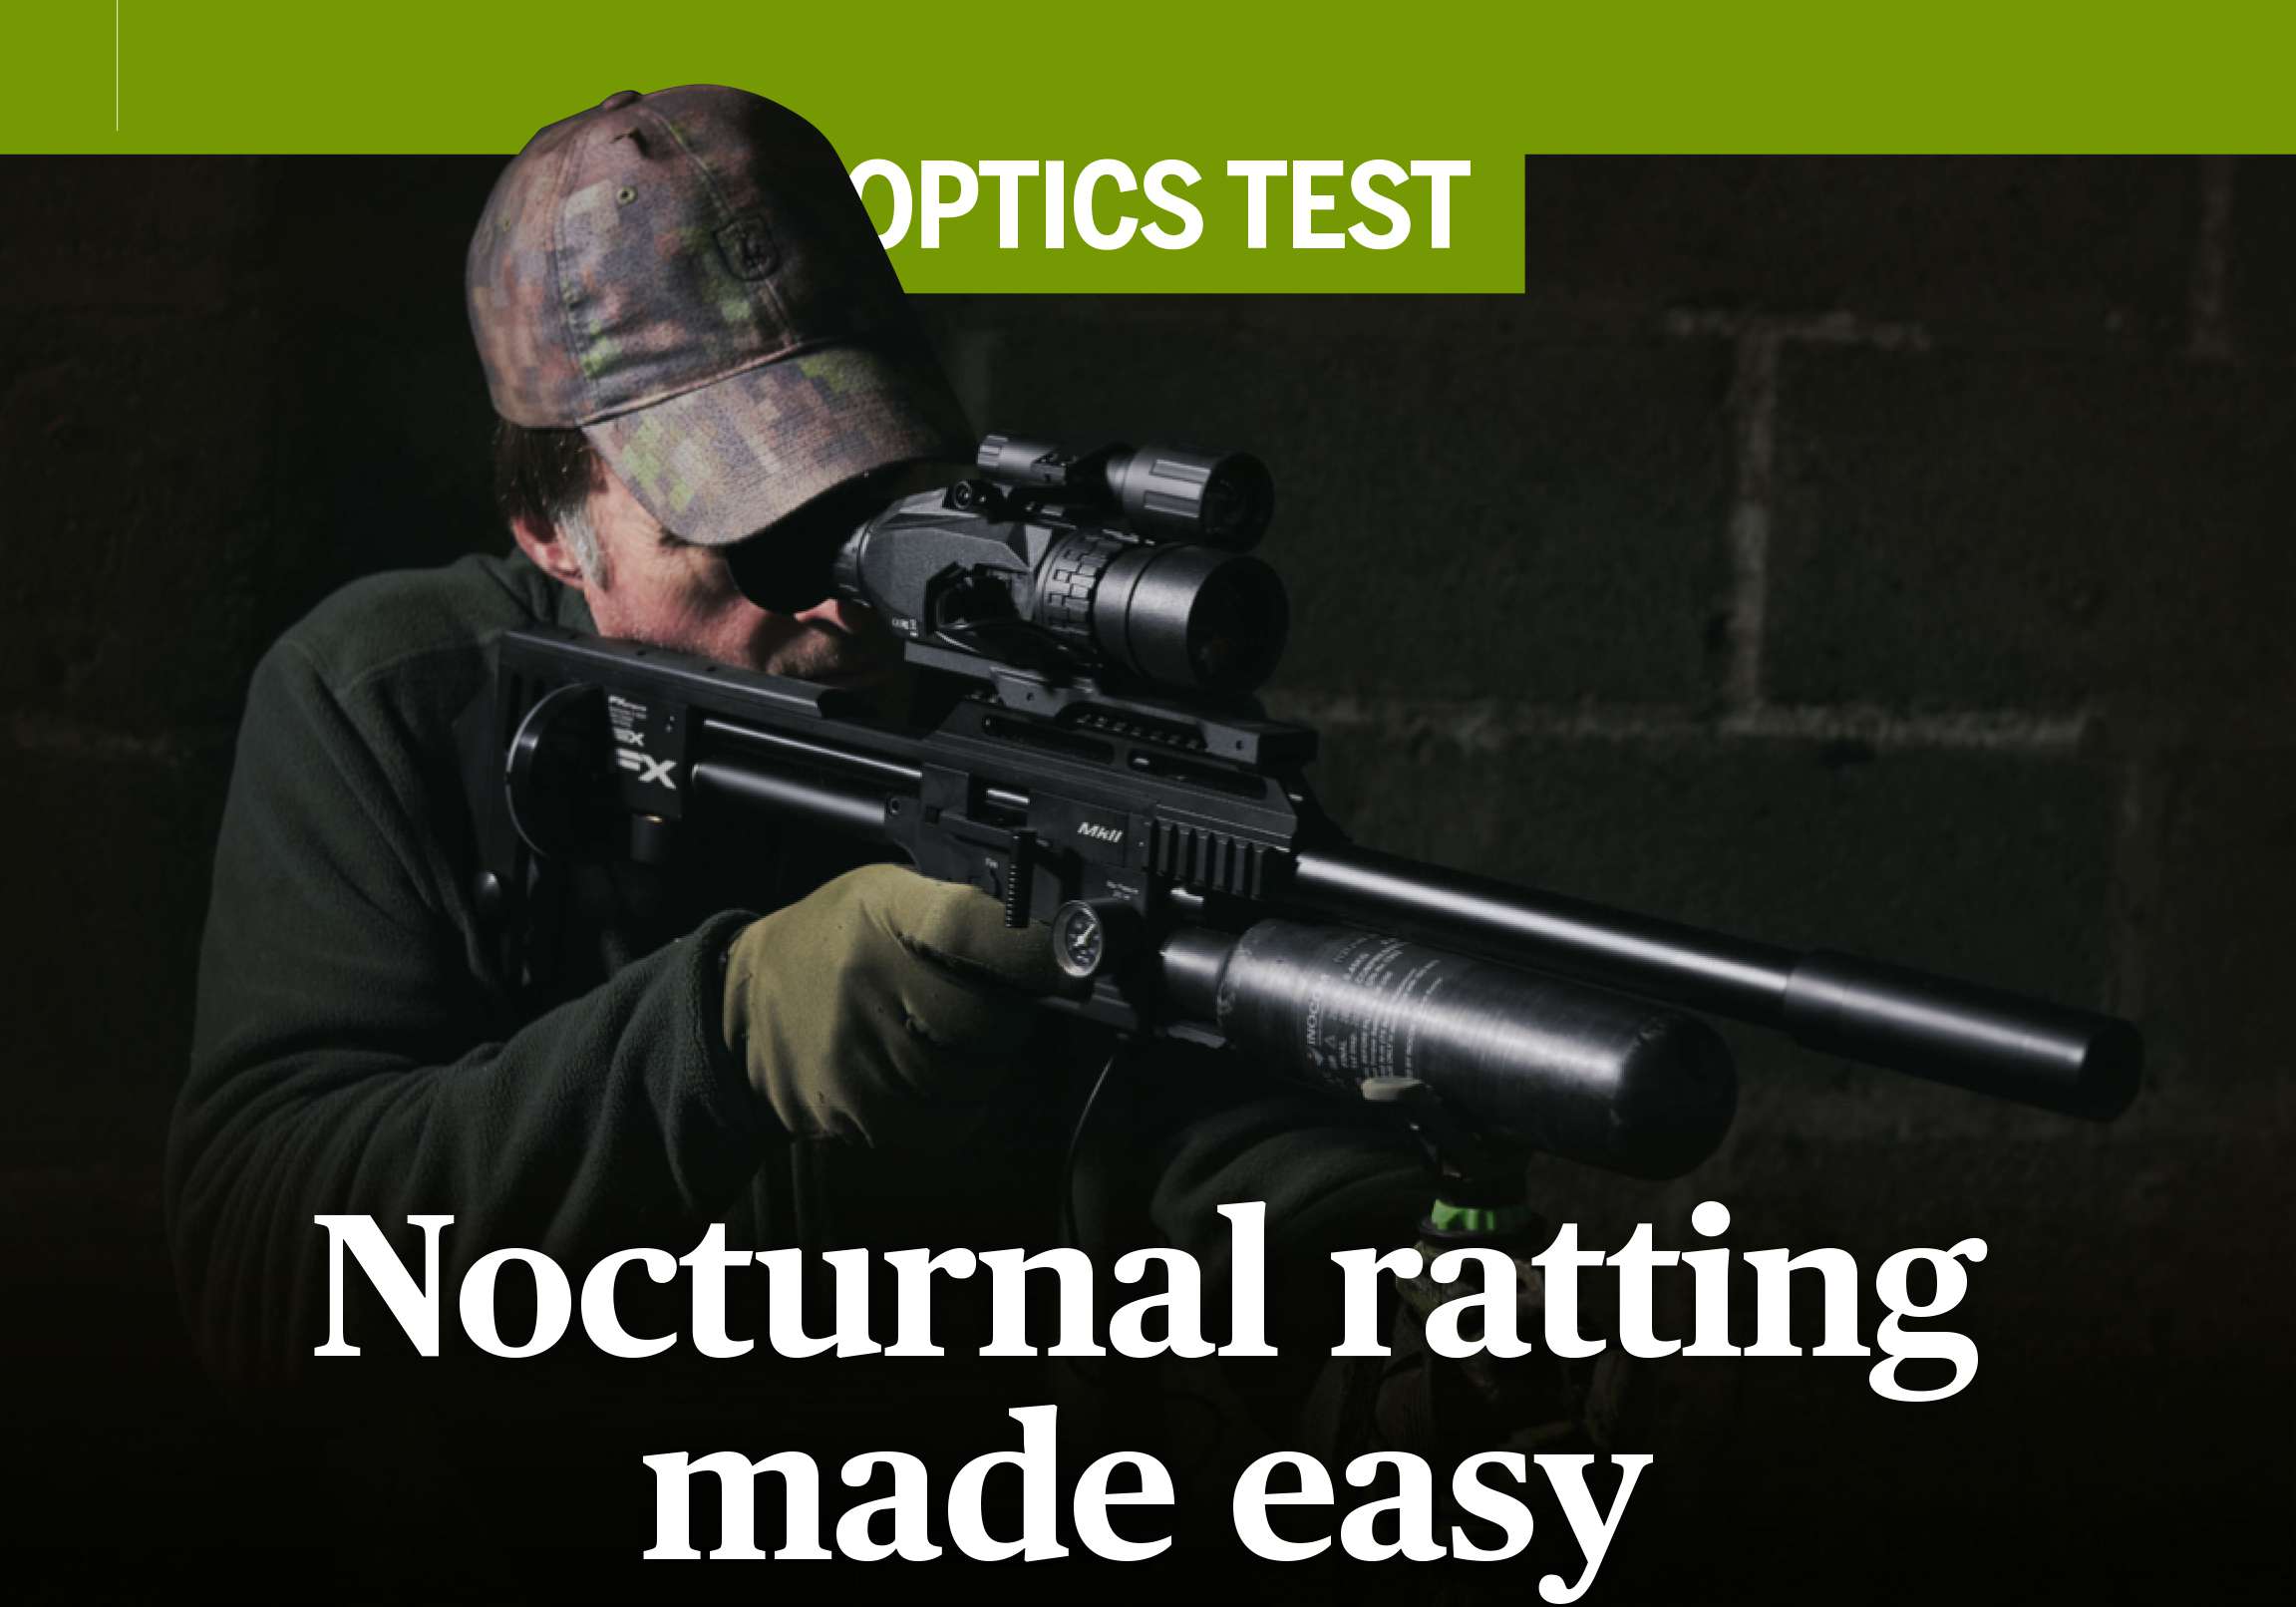 Mat Manning tests the Sightmark Wraith 4K Ultra day/night scope